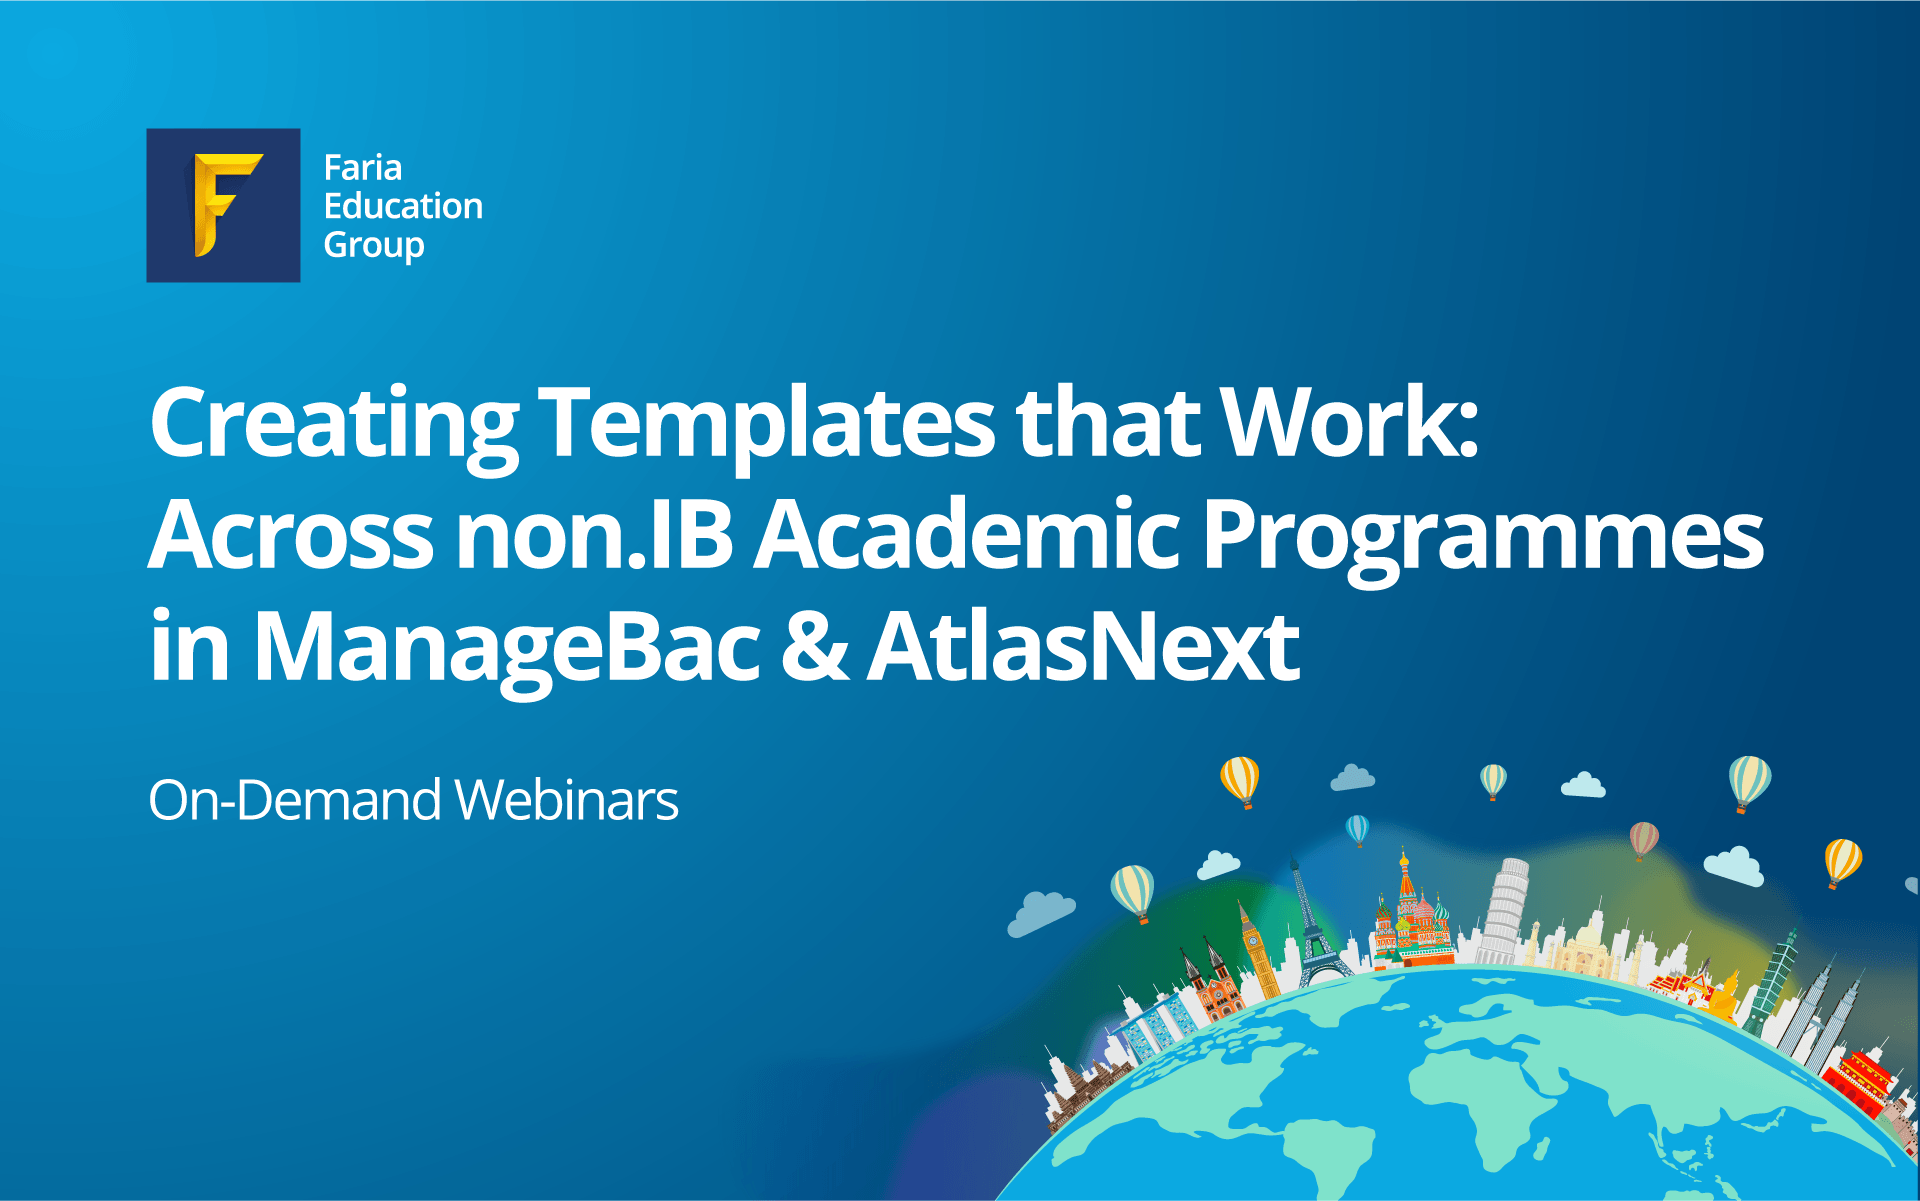 Creating Templates the Work: Across non-IB Academic Programmes in ManageBac or AtlasNext